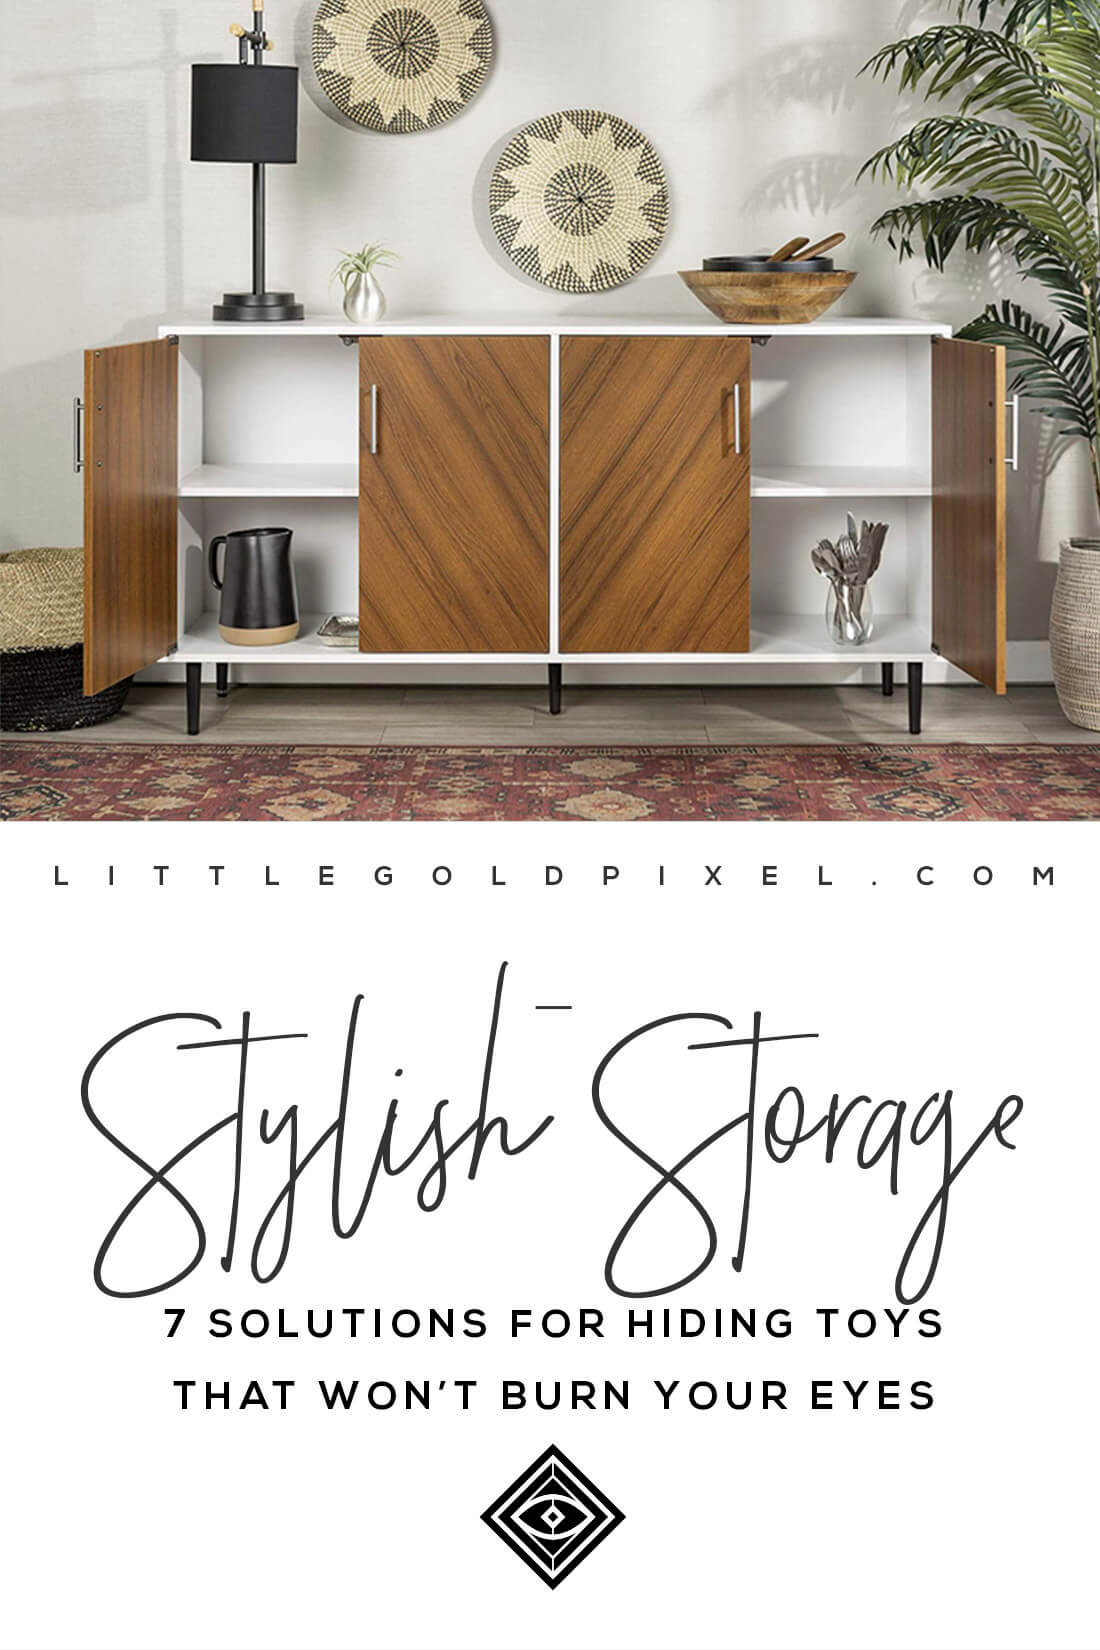 7 Stylish Toy Storage Ideas • Little Gold Pixel • In which I share 7 stylish toy storage ideas that do double duty: keeping the clutter contained in your living room and keeping your eyes from bleeding.